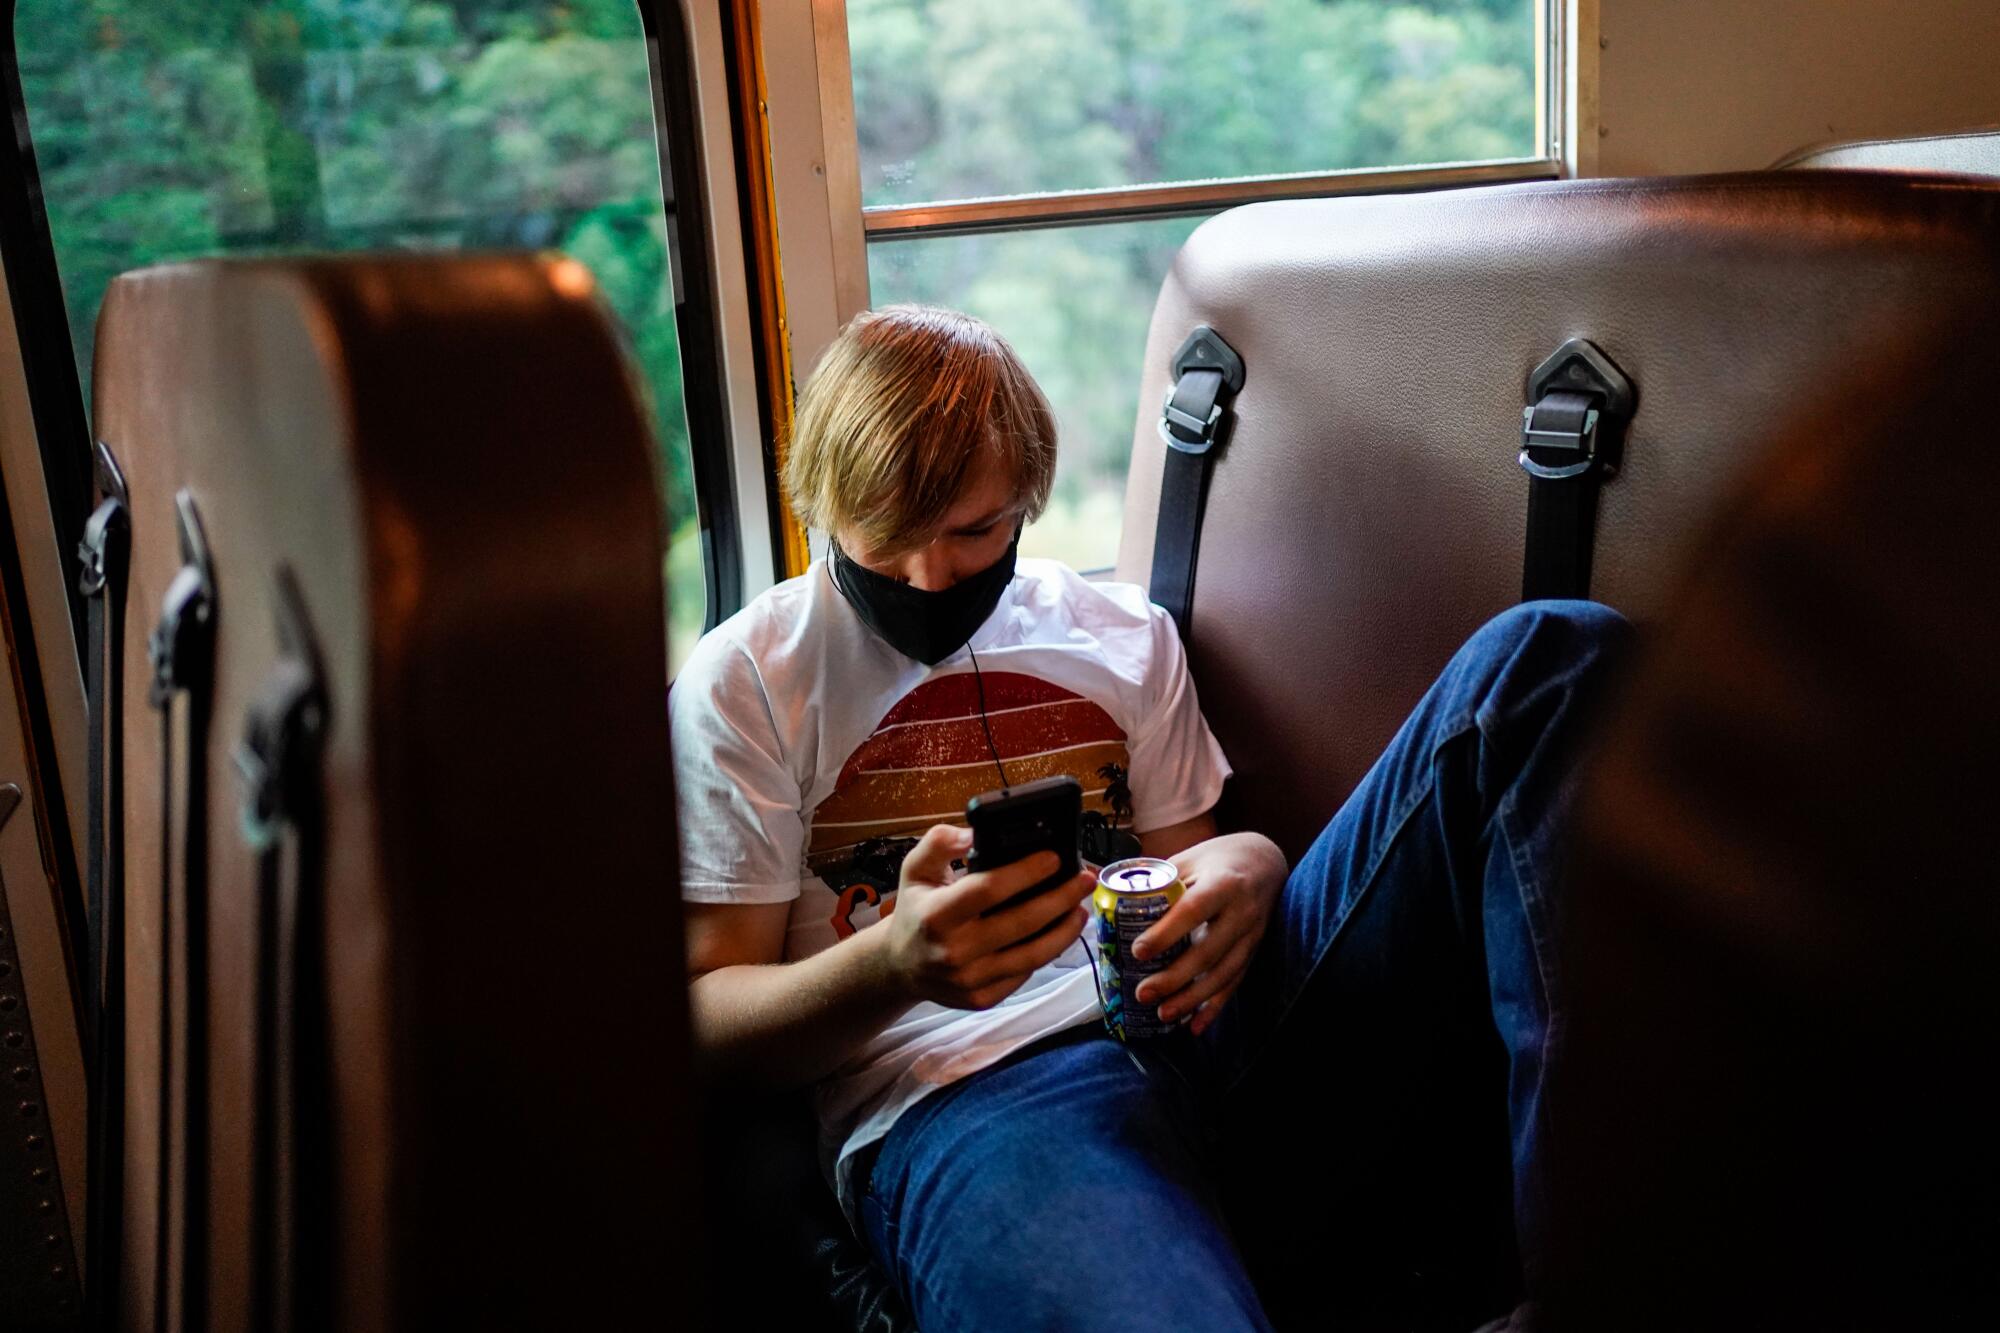 Trinity High student Billy Atkission, 17, looks at his phone while riding the bus to school.